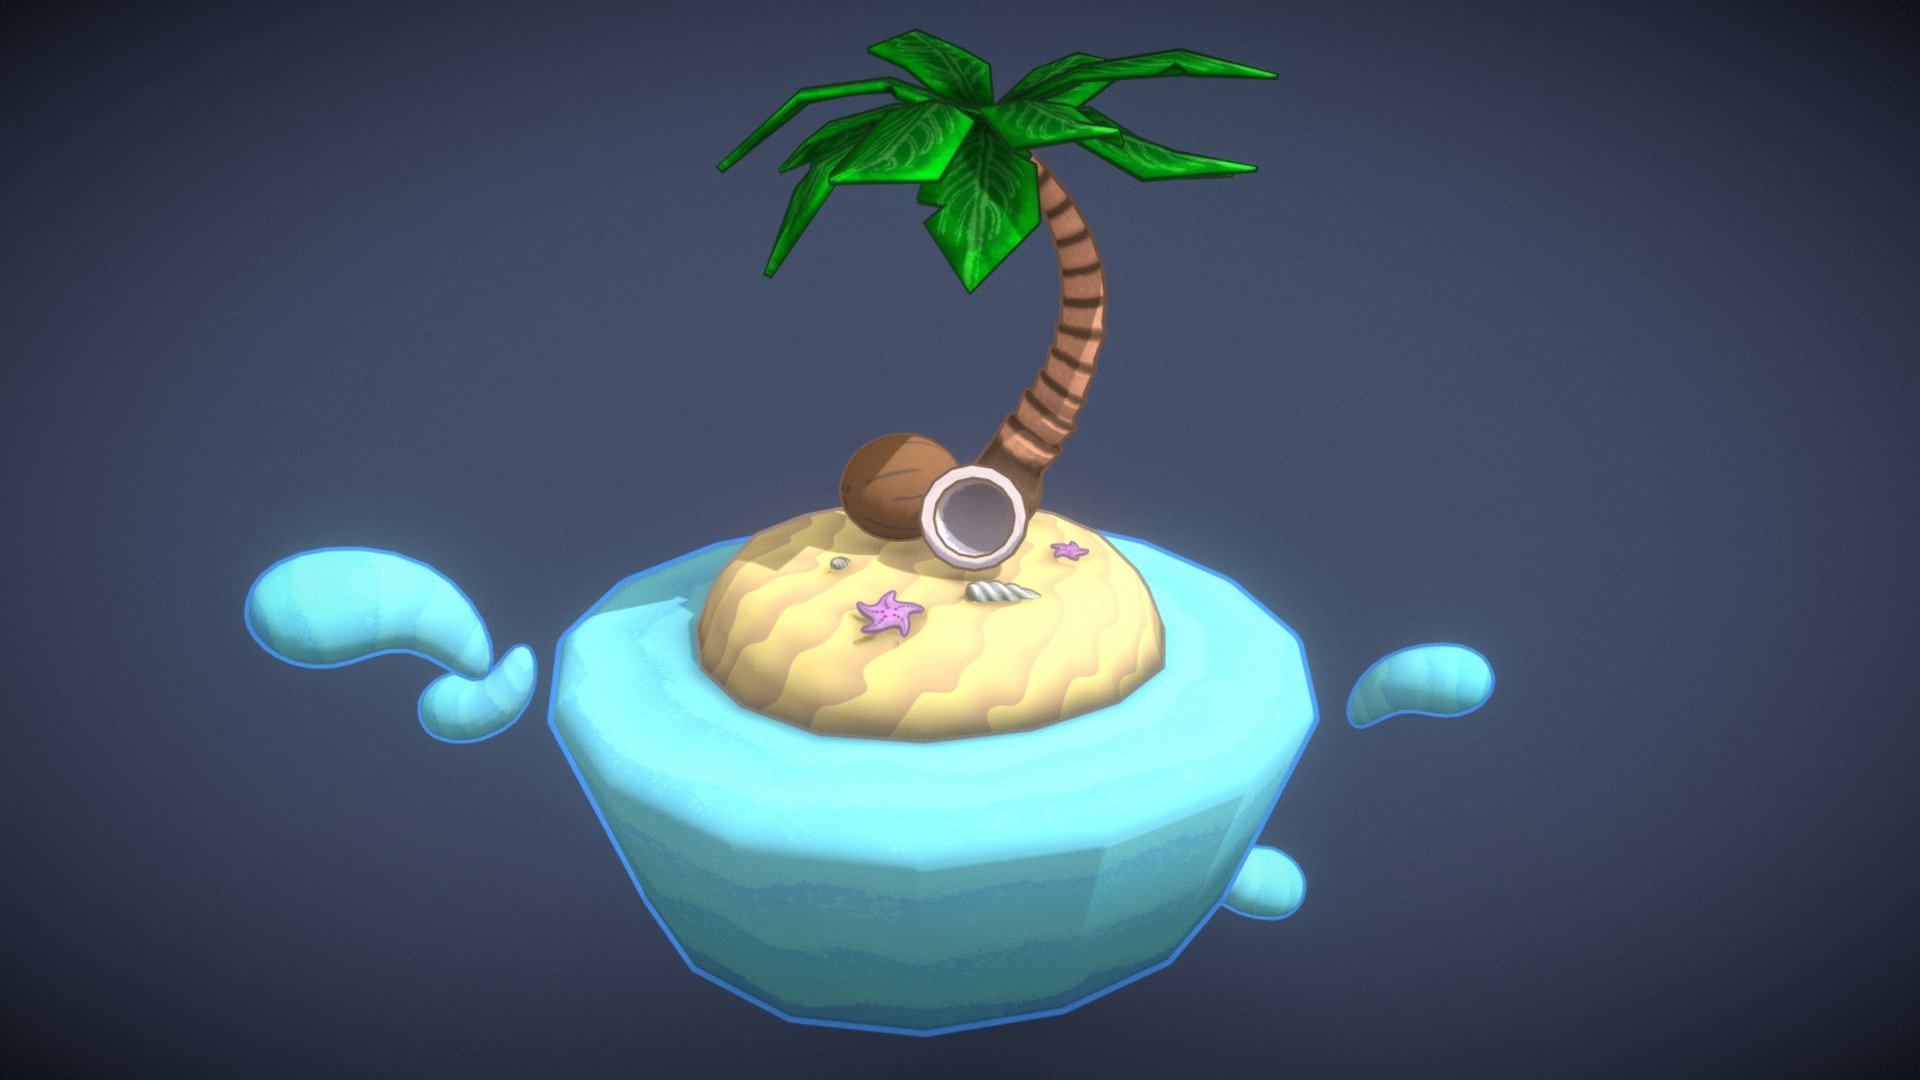 A hand-painted, stylized floating beach island with coconuts and a cute little tree. :) - Hand Painted Stylized Coconut Palm Tree Island - Download Free 3D model by Kigha 3d model